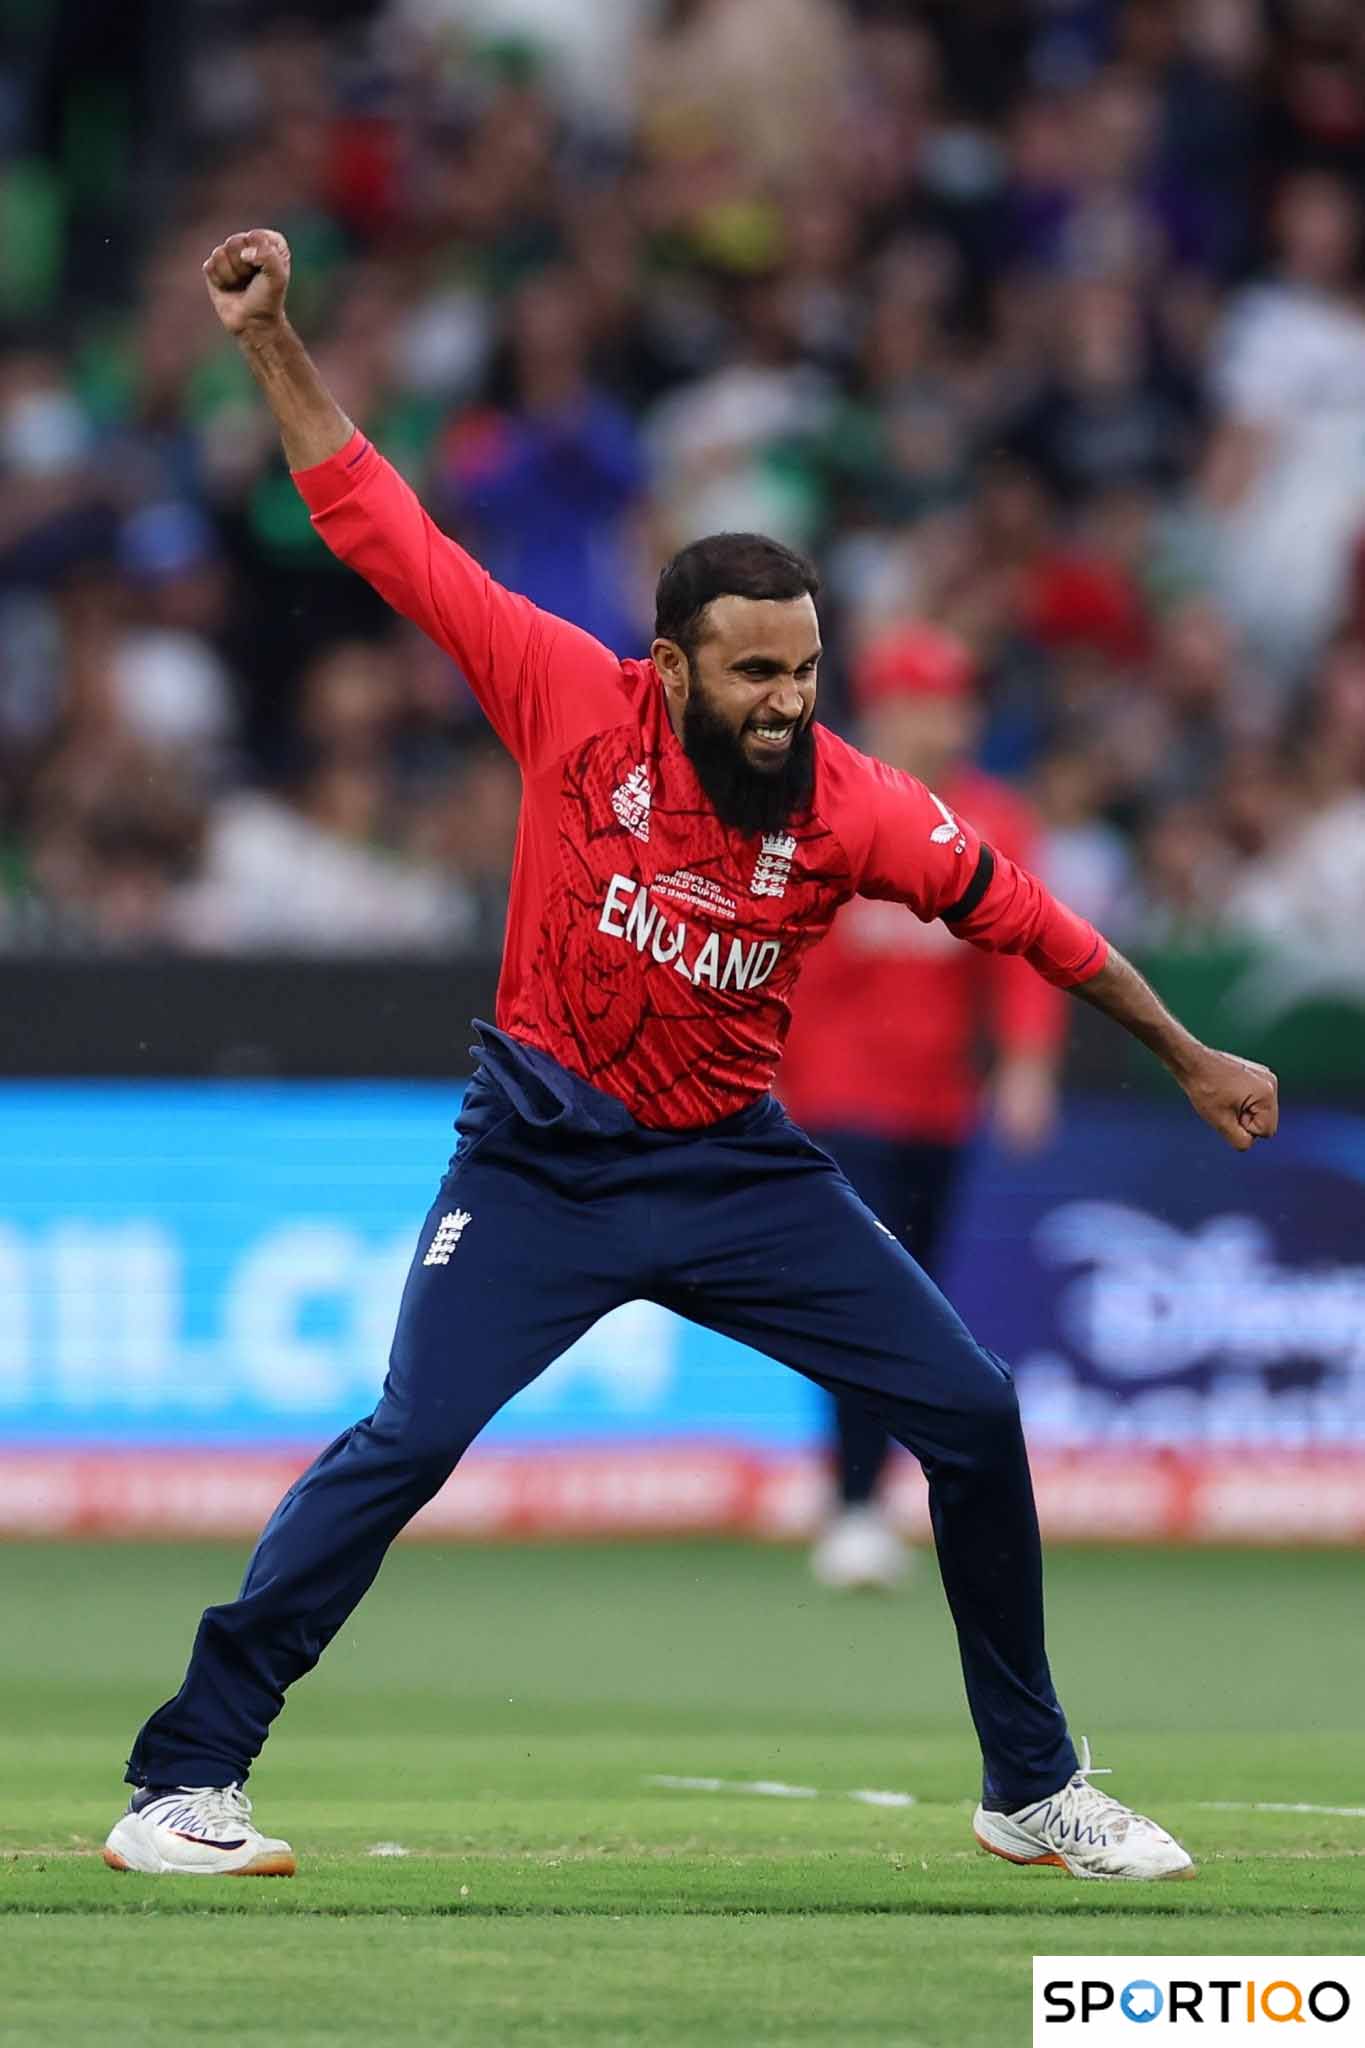 Adil Rashid celebrating after taking a wicket in T20 World Cup 2022